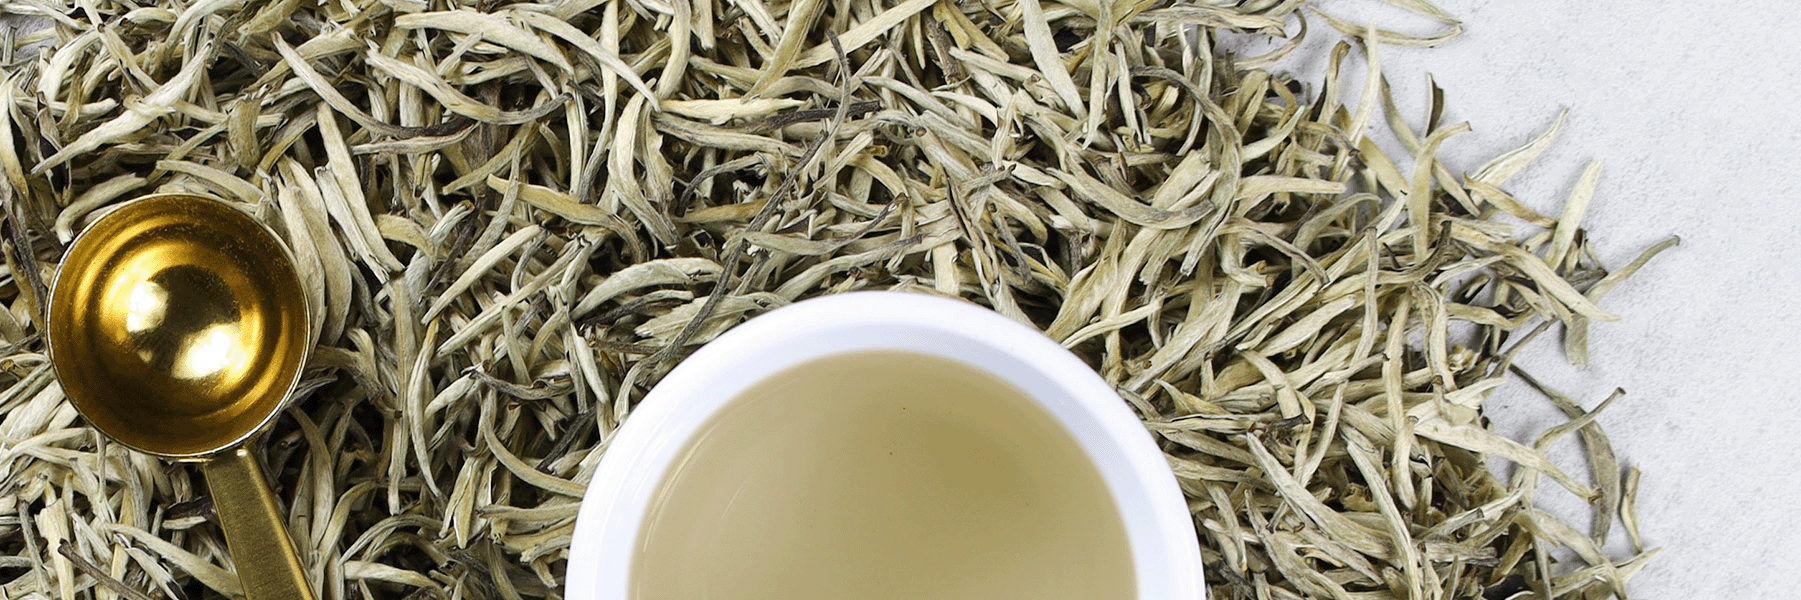 A pile of King of Silver Needle tea